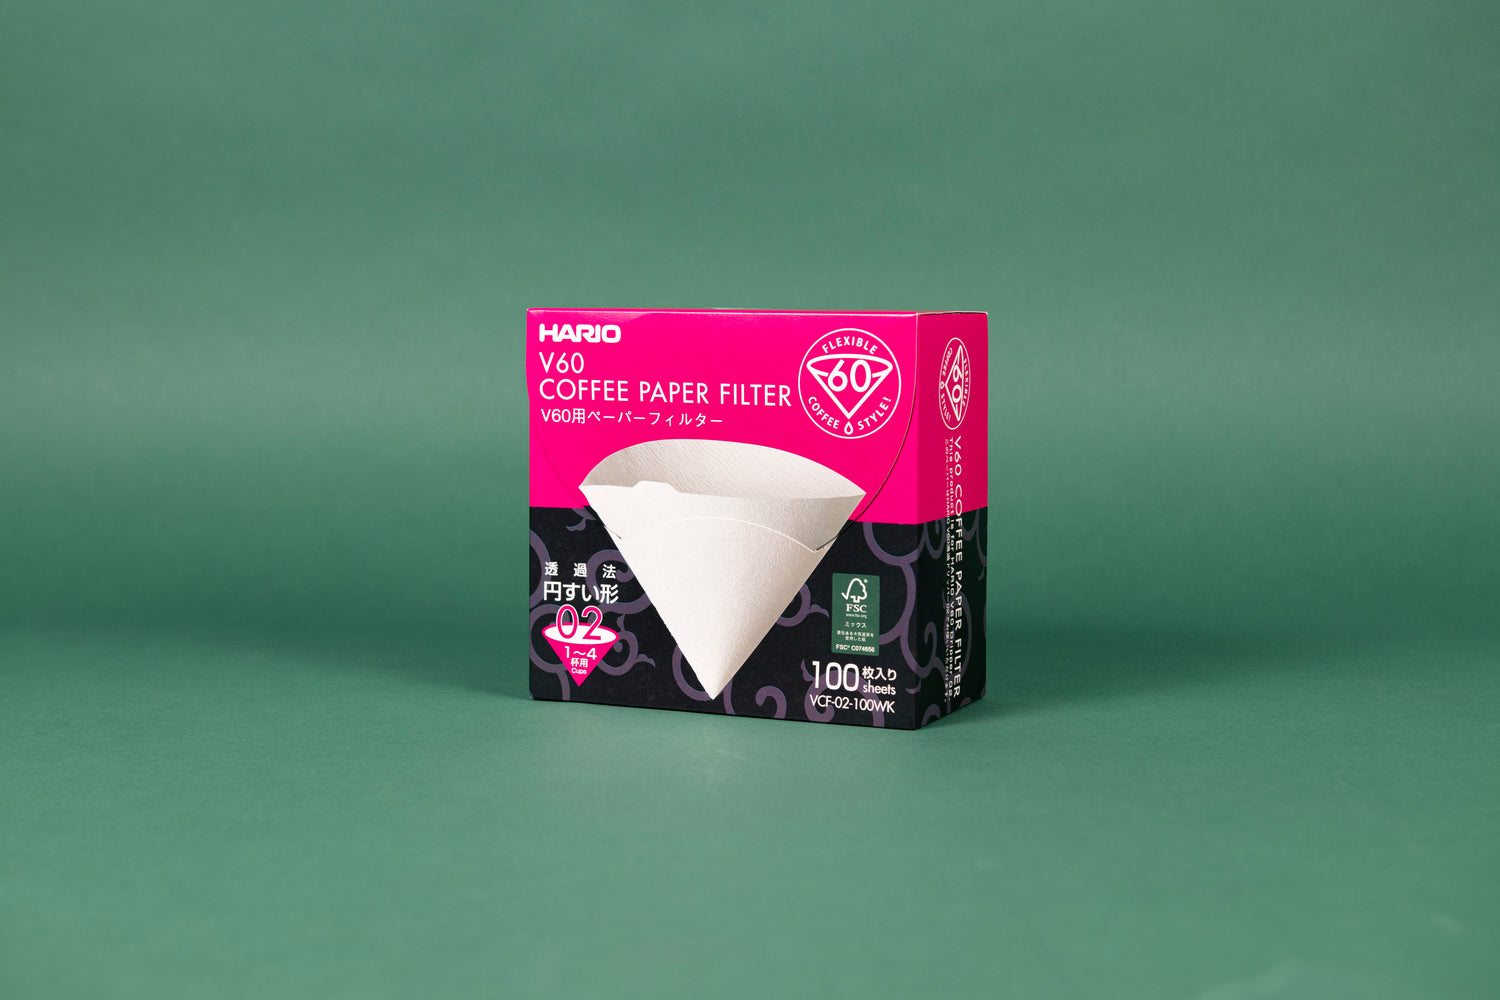 Large pink and black cardboard box with tabbed flip top lid with picture of white paper filter cone on front with white text and set against a green background.